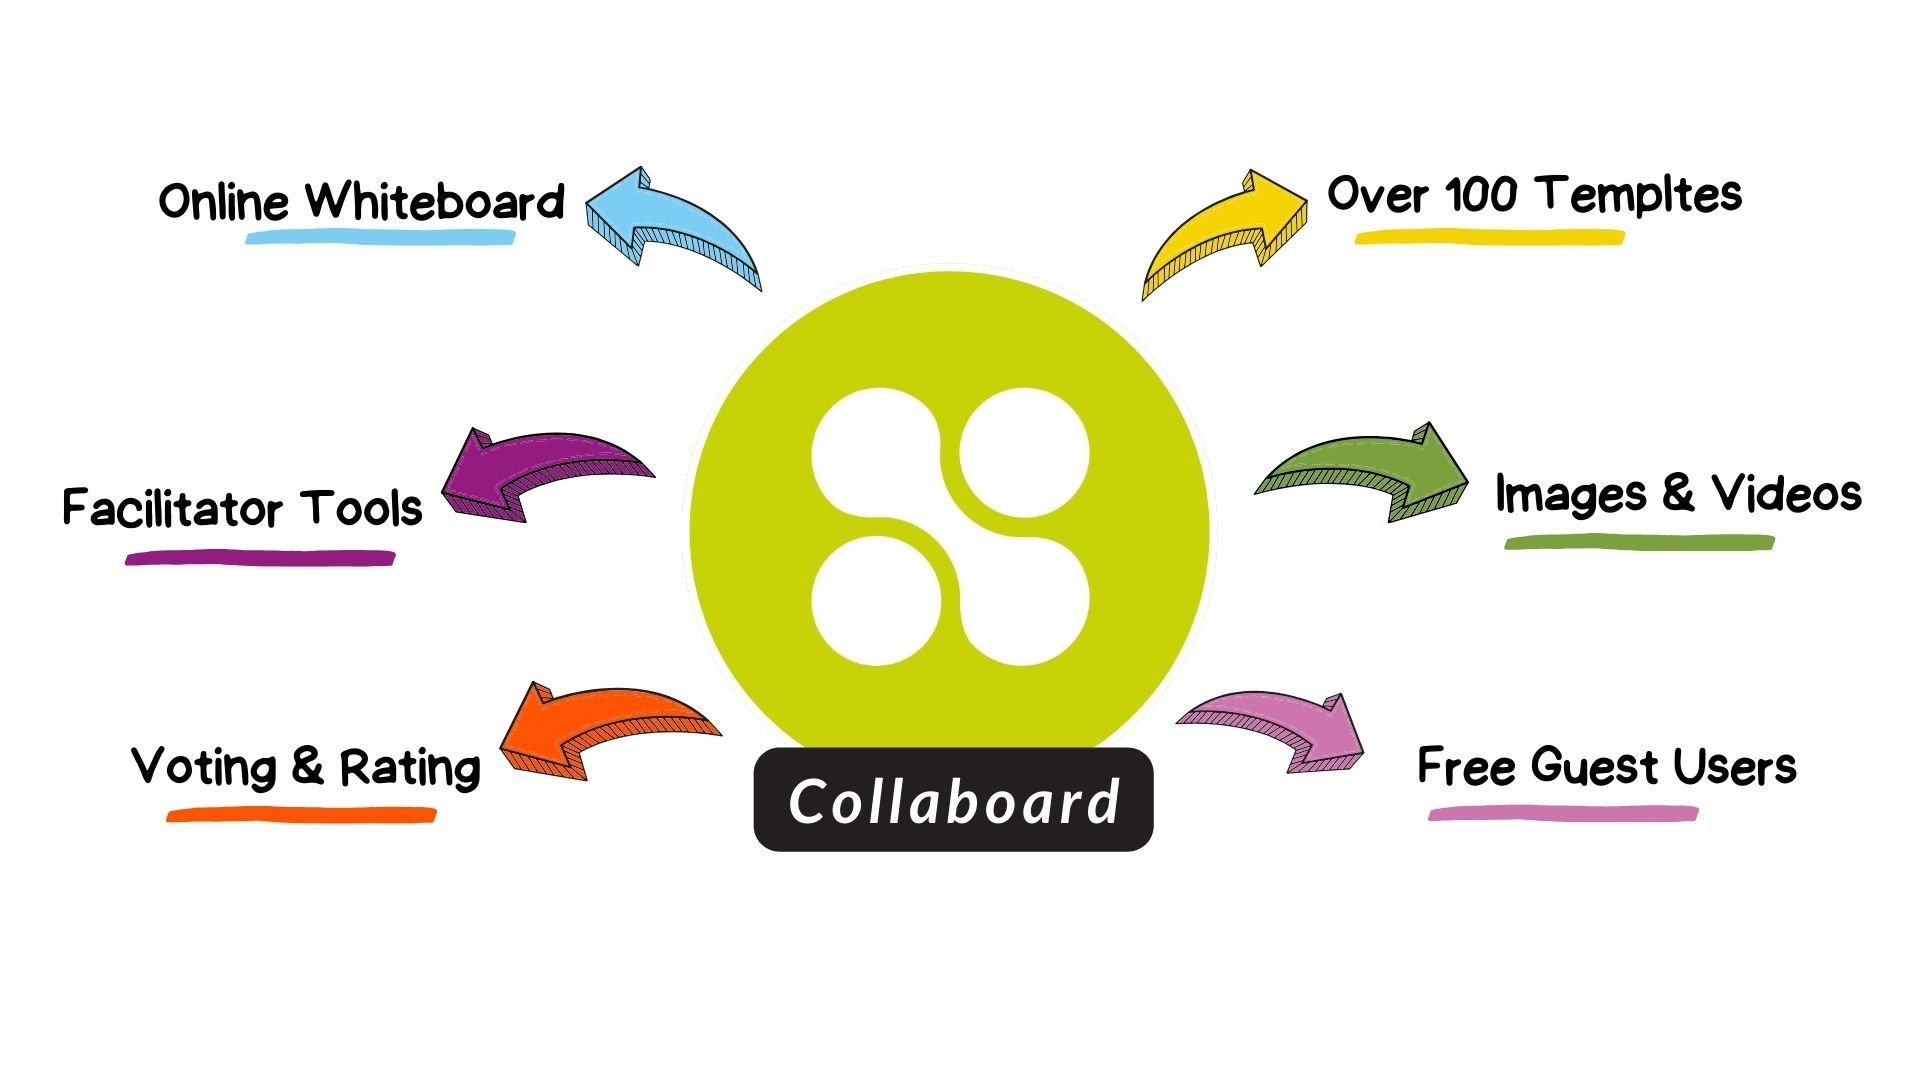 about Collaboard